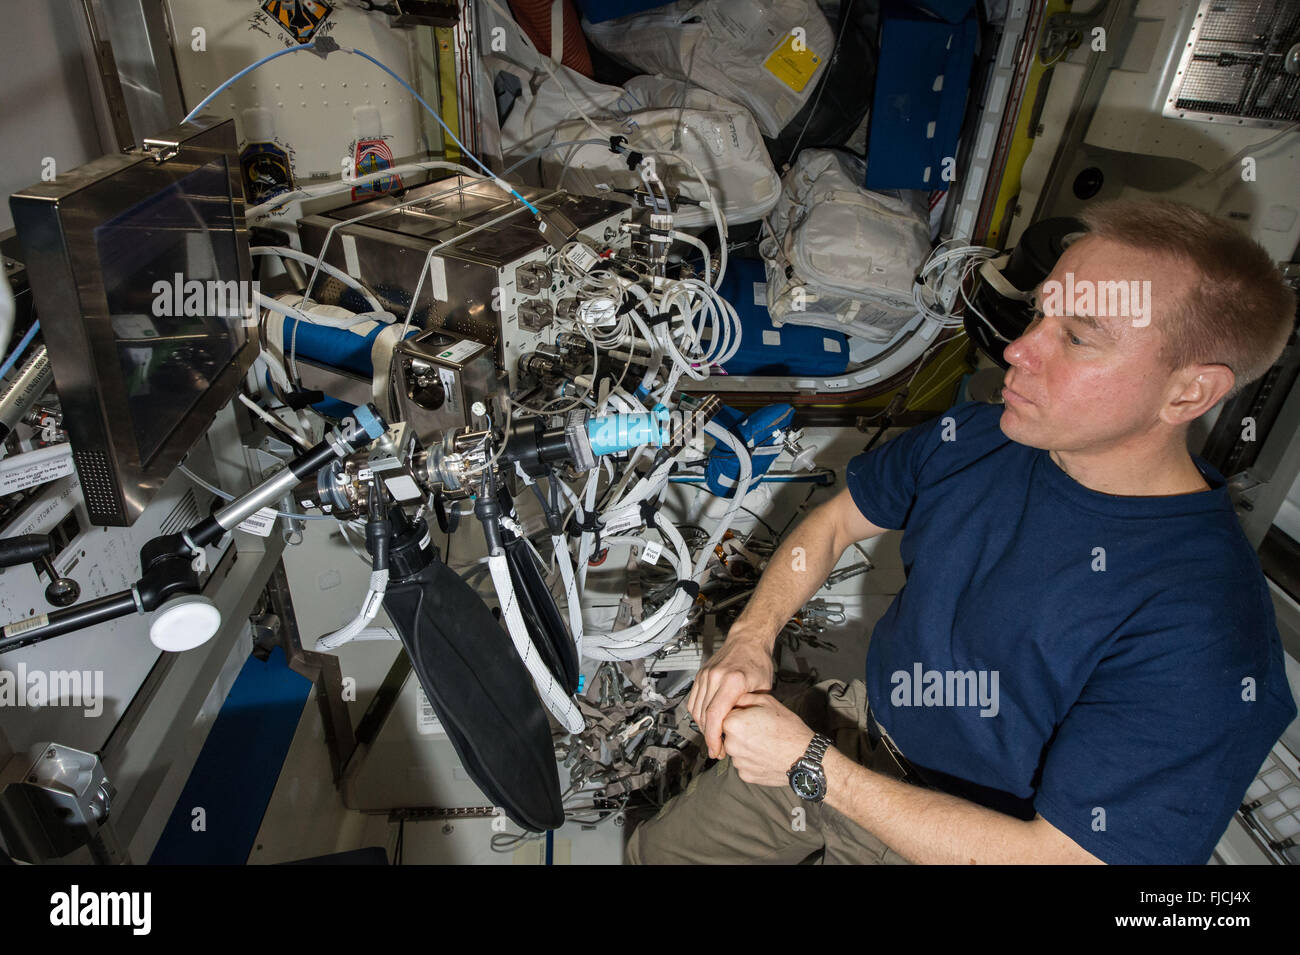 NASA astronaut Tim Kopra prepares to participate in an Airway Monitoring experiment aboard the International Space Station February 25, 2016 in Earth Orbit. Airway Monitoring studies the occurrence of airway inflammation in crewmembers, using ultra-sensitive gas analyzers to analyze exhaled air. This helps to highlight any health impacts and to maintain crewmember well-being on future human spaceflight missions. Stock Photo